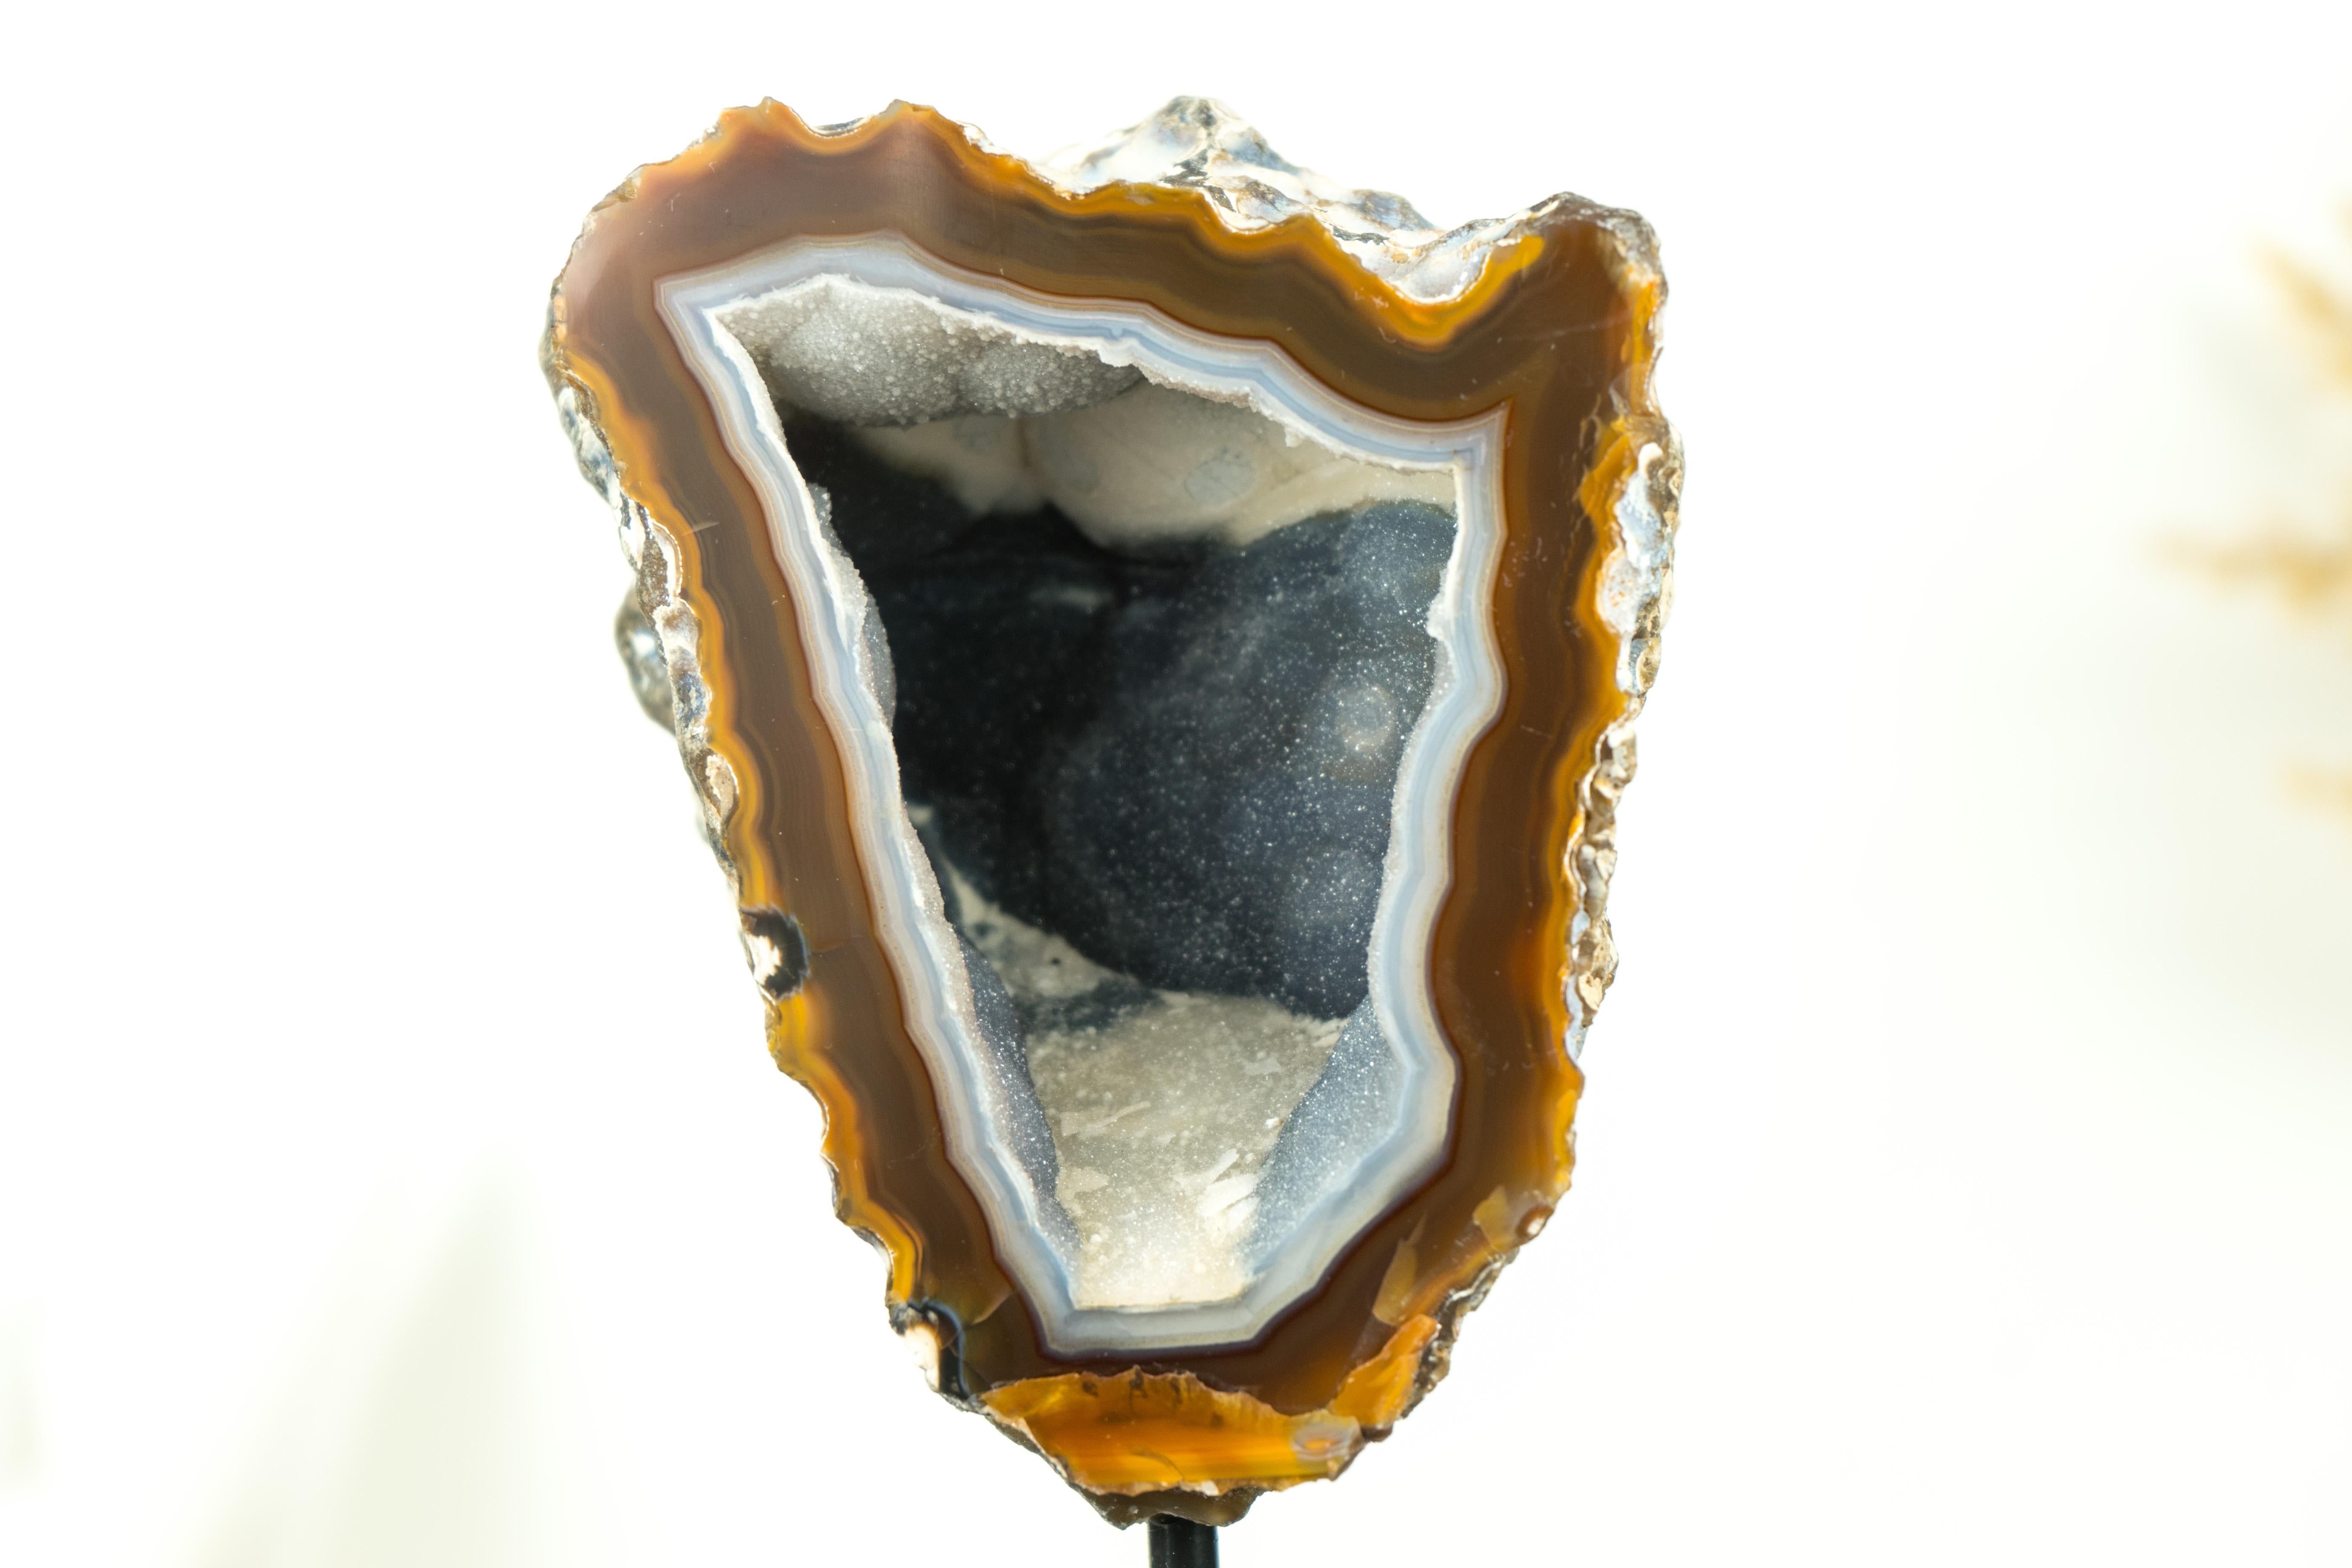 Gallery Grade Amber and White Lace Agate Geode with Blue Galaxy Druzy For Sale 4